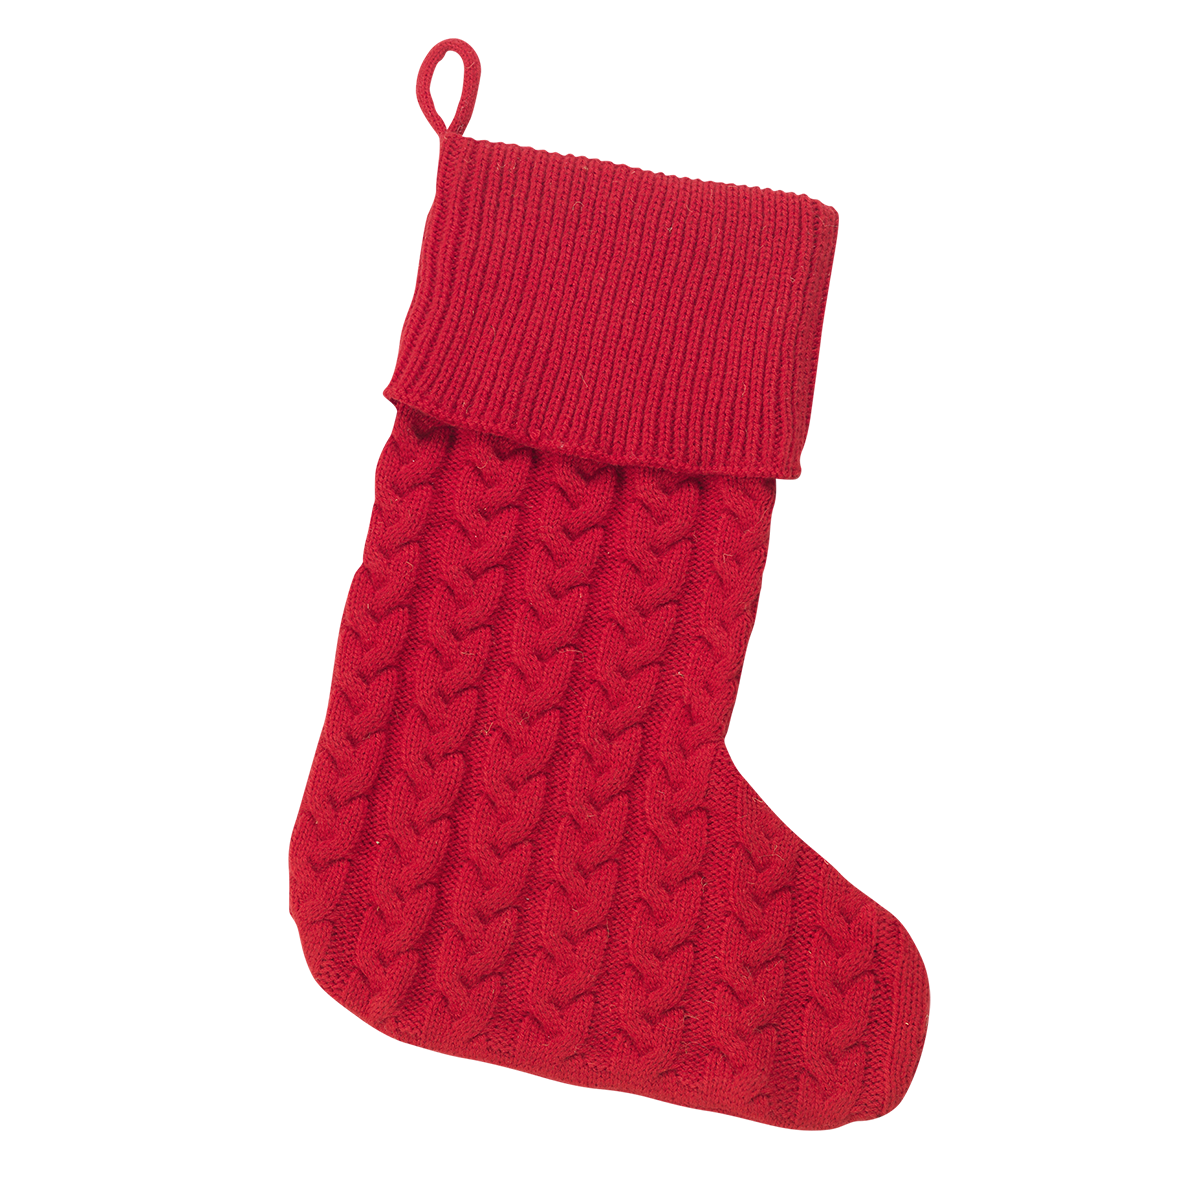 Cable Knit Stockings